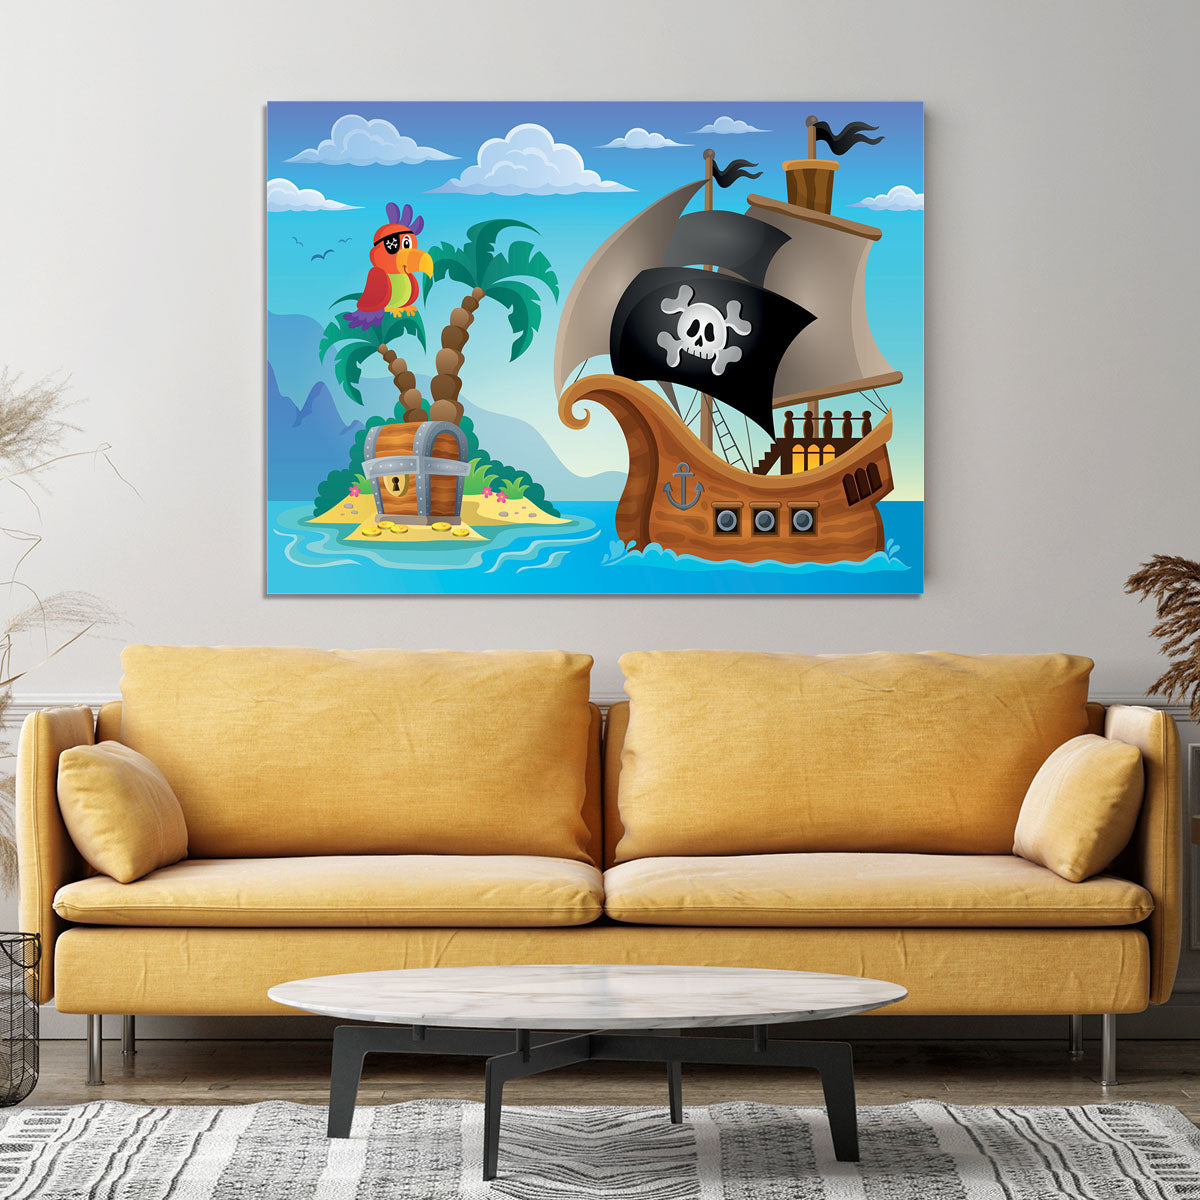 Small pirate island theme 2 Canvas Print or Poster - Canvas Art Rocks - 4